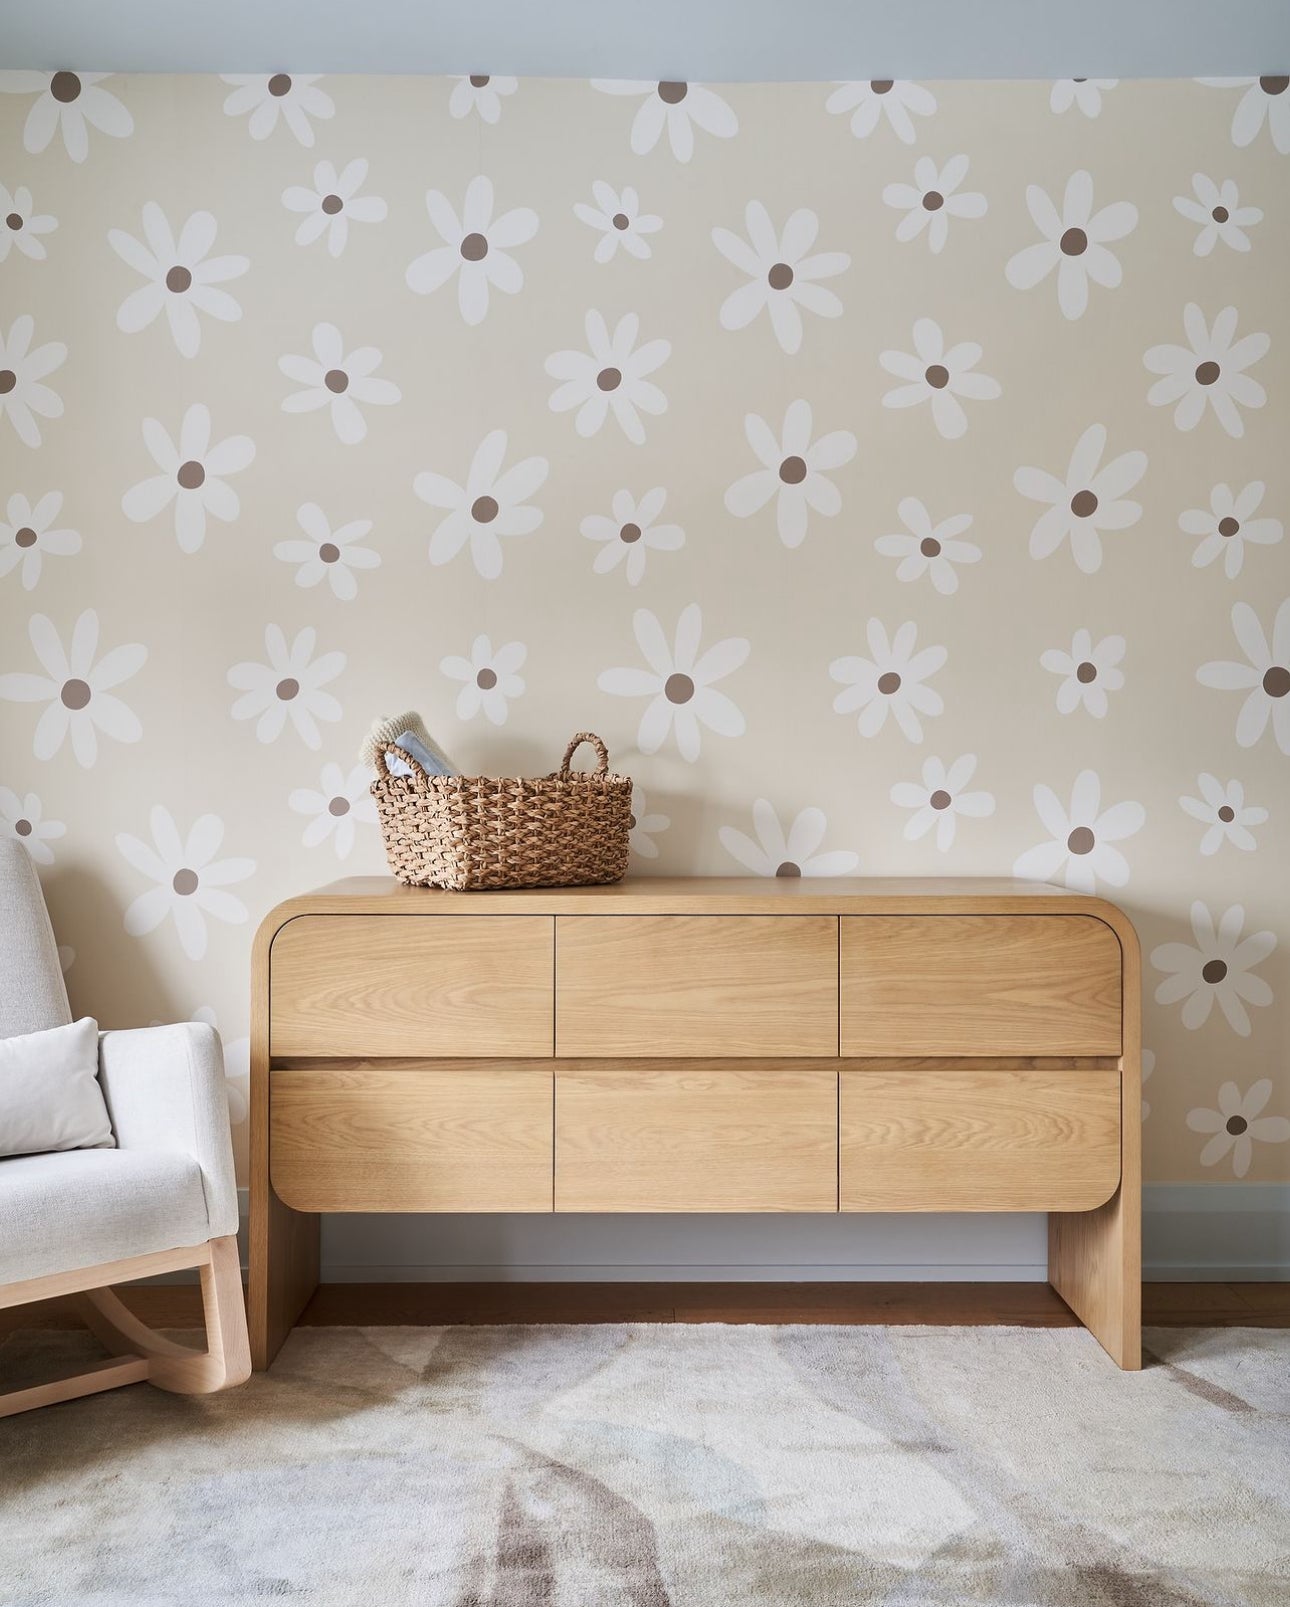 A modern home setting showing a wooden credenza against a wall covered with Simple Daisy Wallpaper. Above the credenza, a light-colored armchair and a woven basket enhance the room's modern yet cozy appeal.